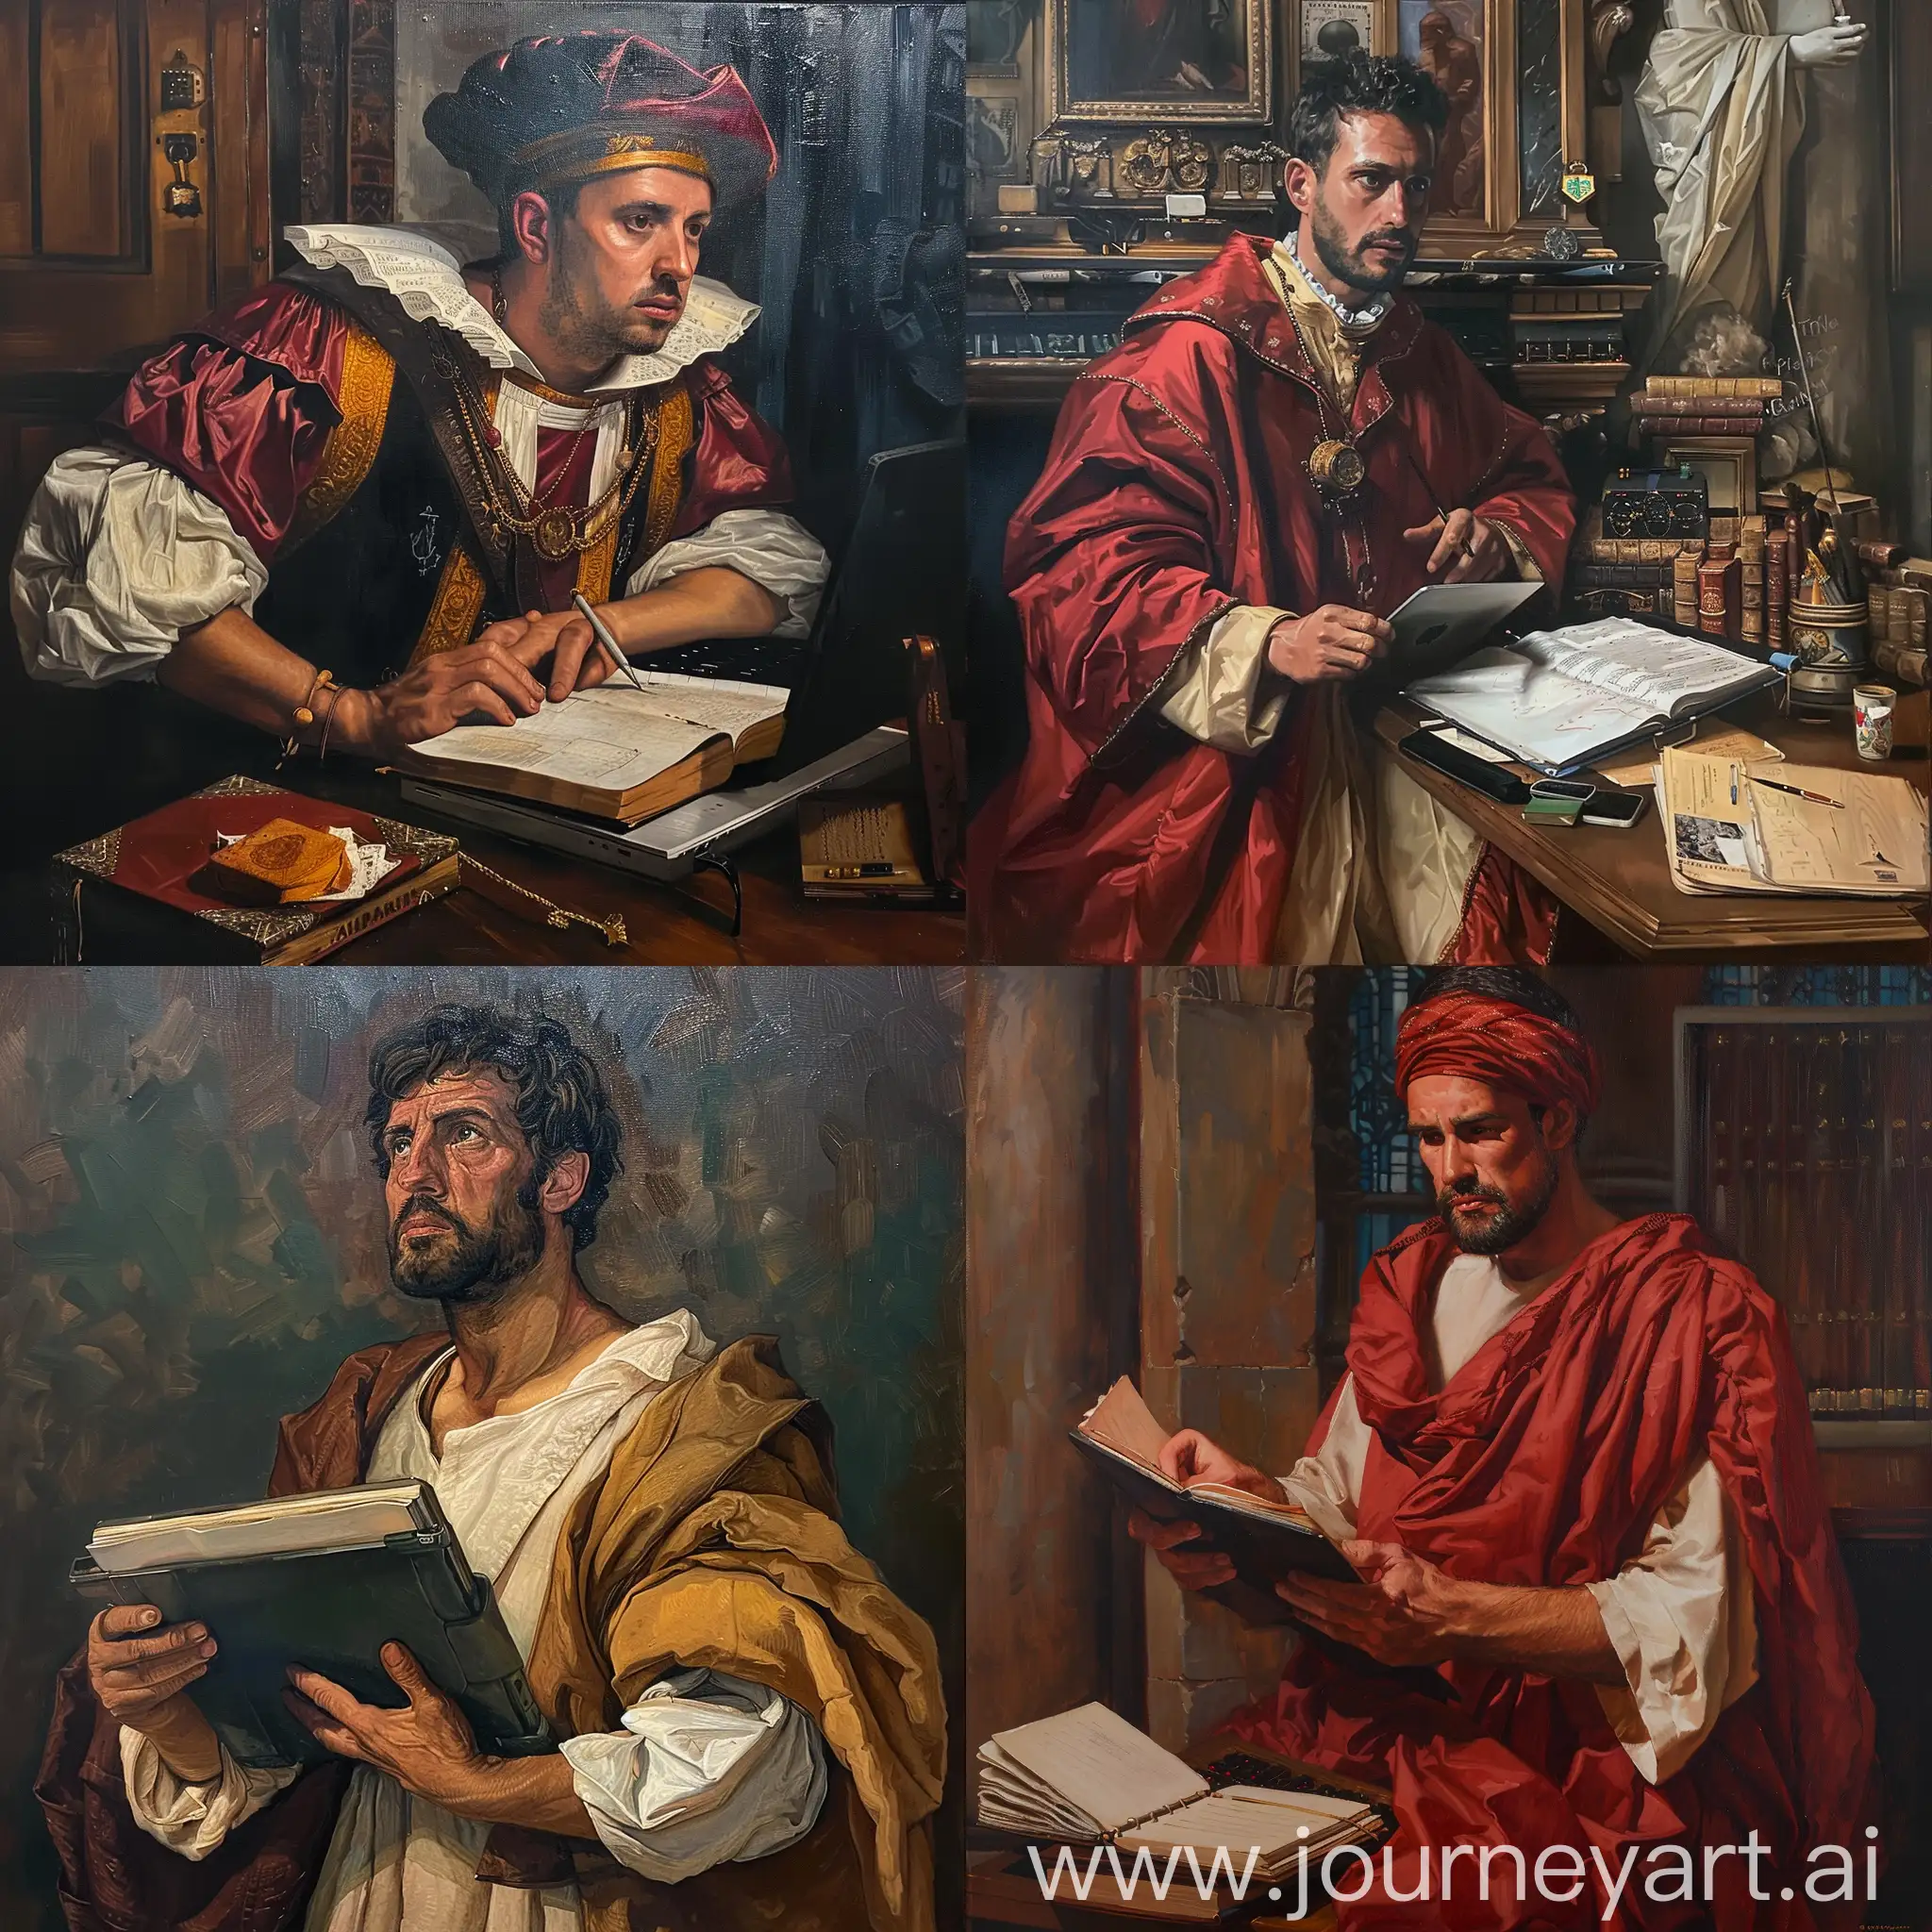 Professional-IT-Specialist-Presents-Renaissance-Style-Oil-Painting-Project